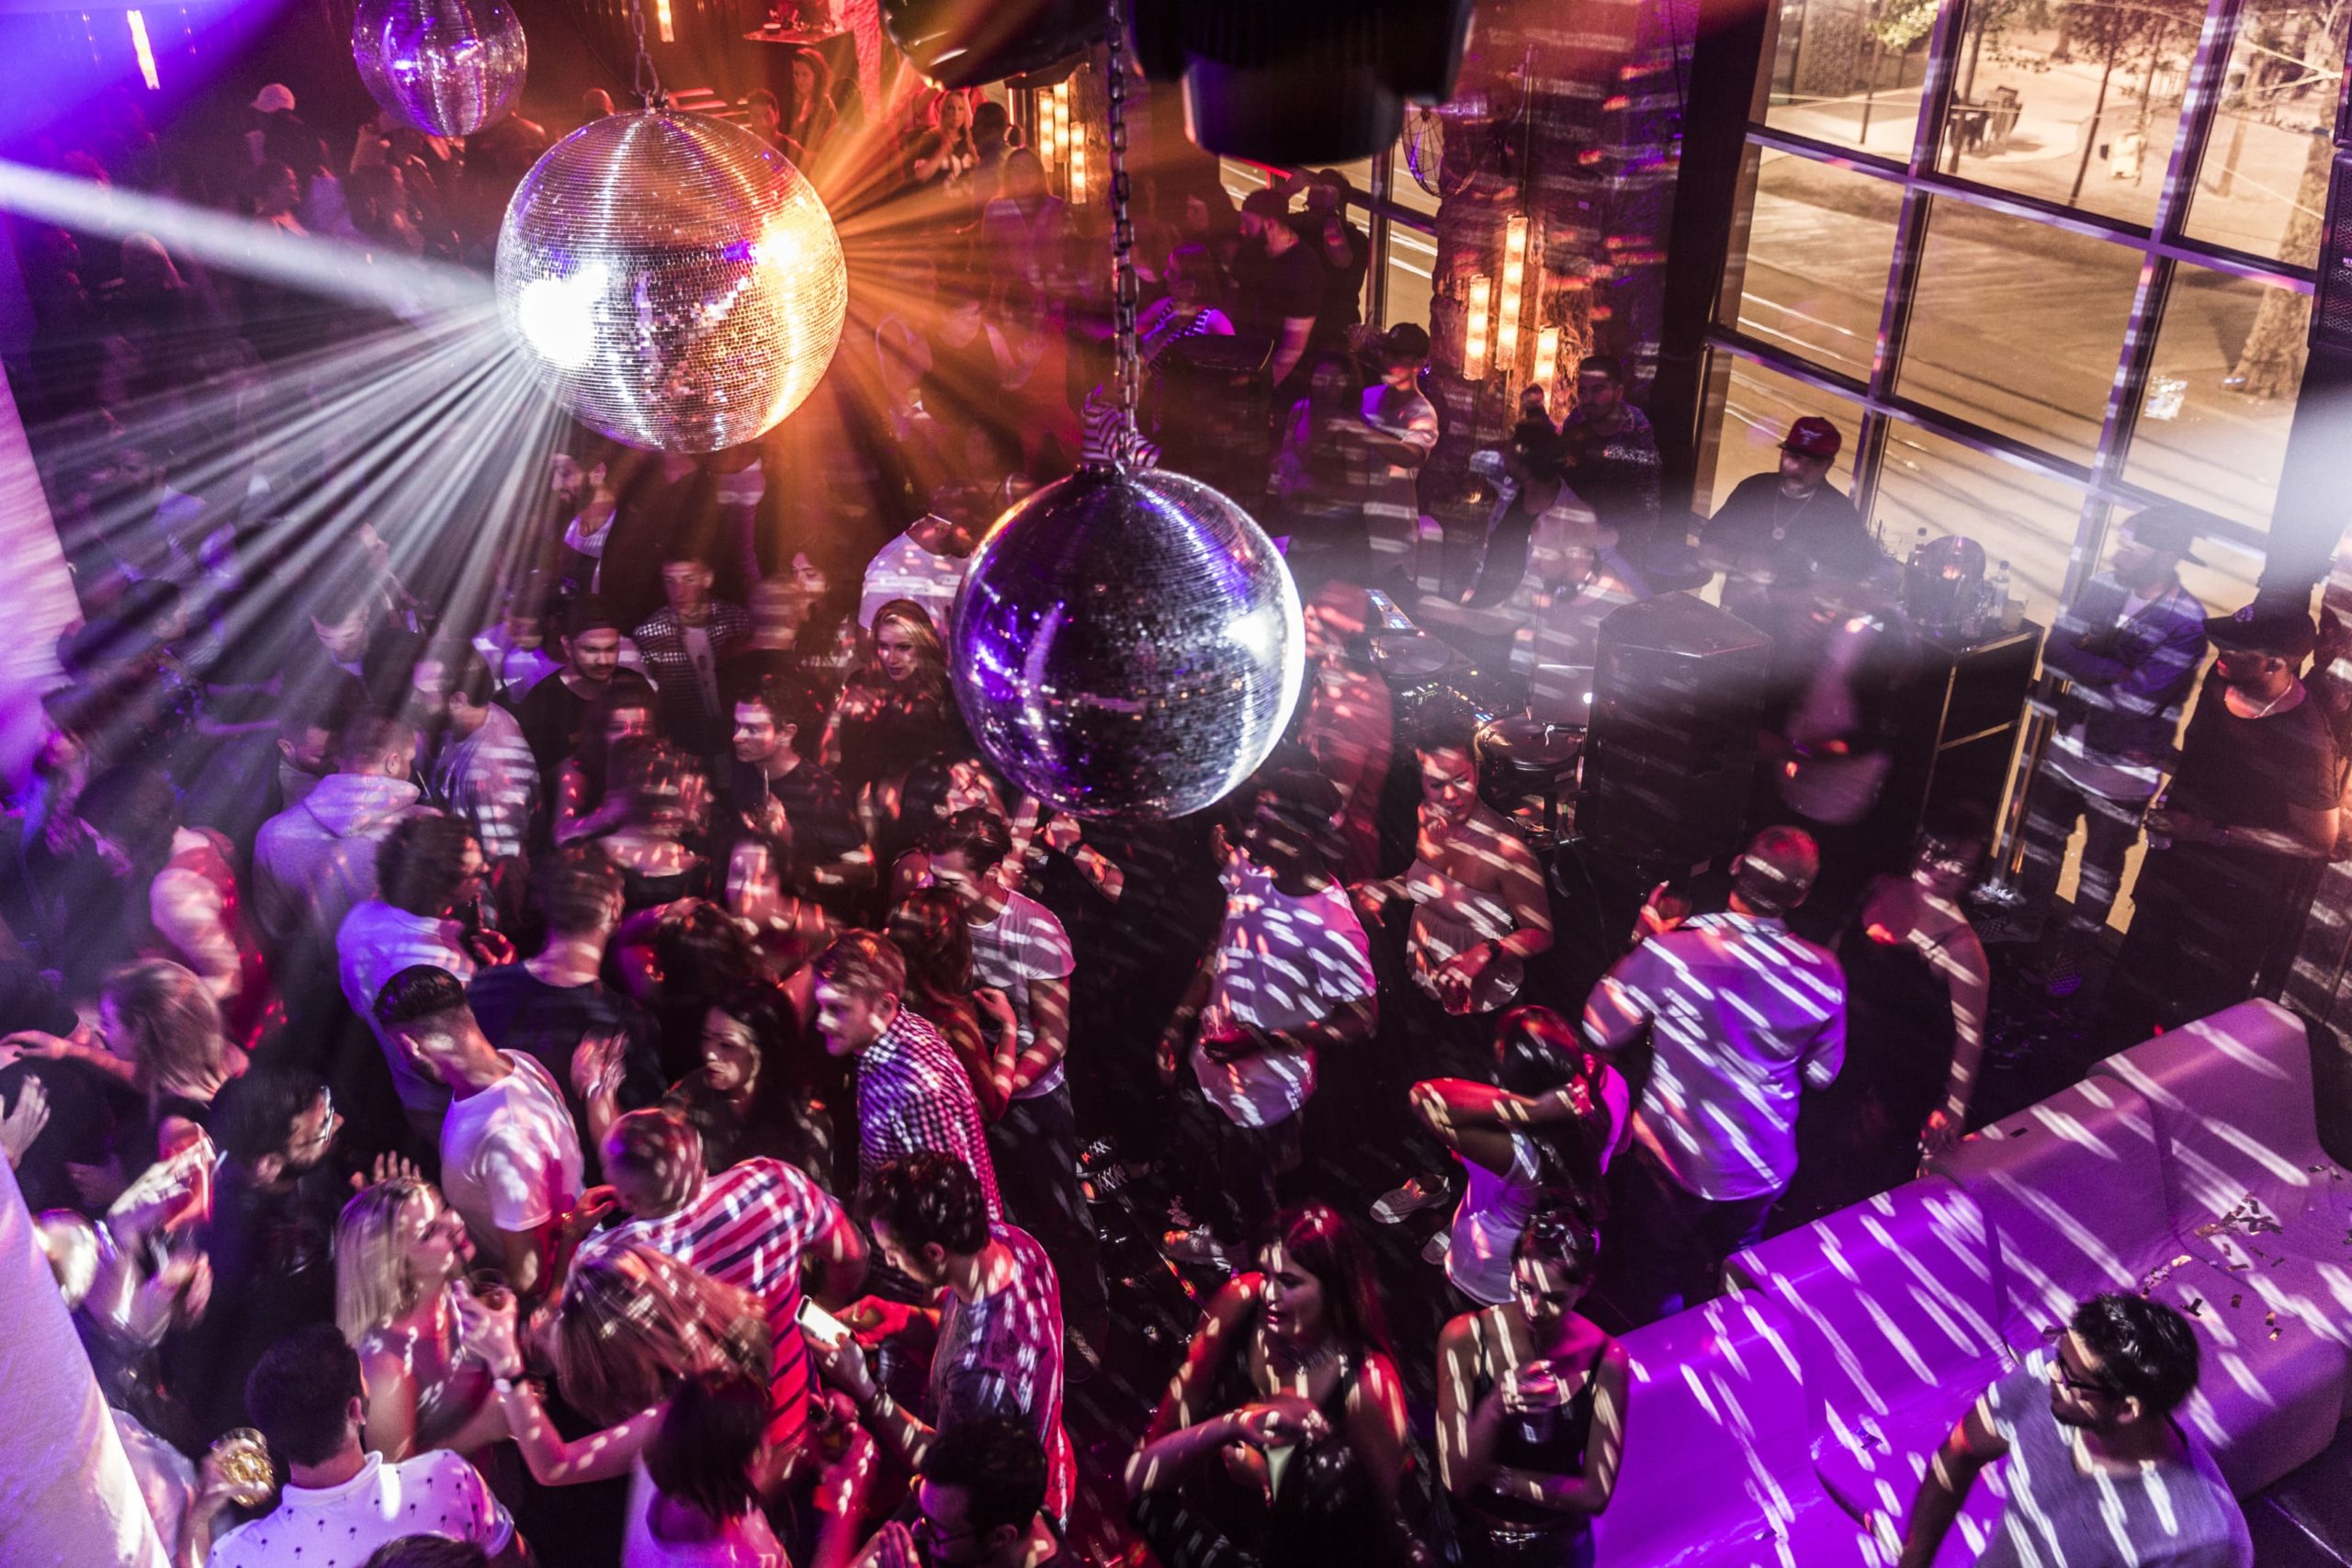 Nightlife in Zurich: Parties, Concerts, Bars, and Clubs